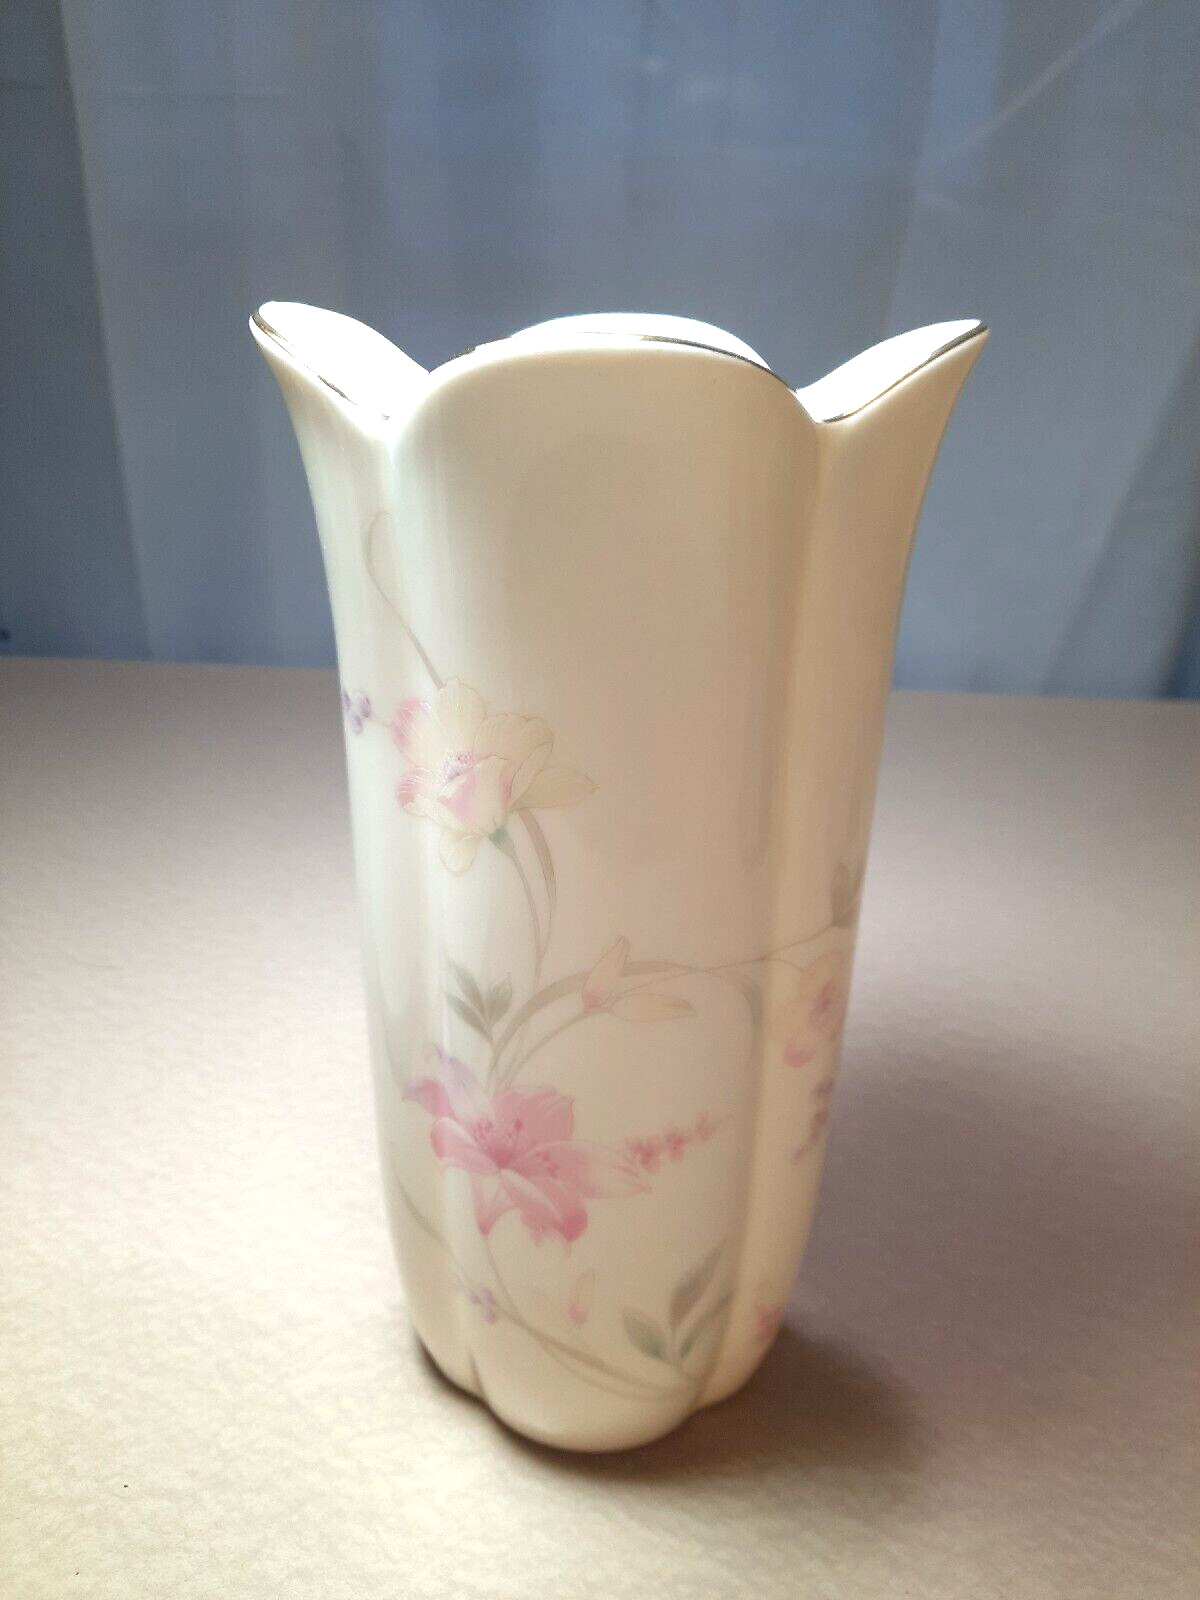 Flower Vase Made Of Fine China In The Shape Of A Tulip Floral Design Gold Trim